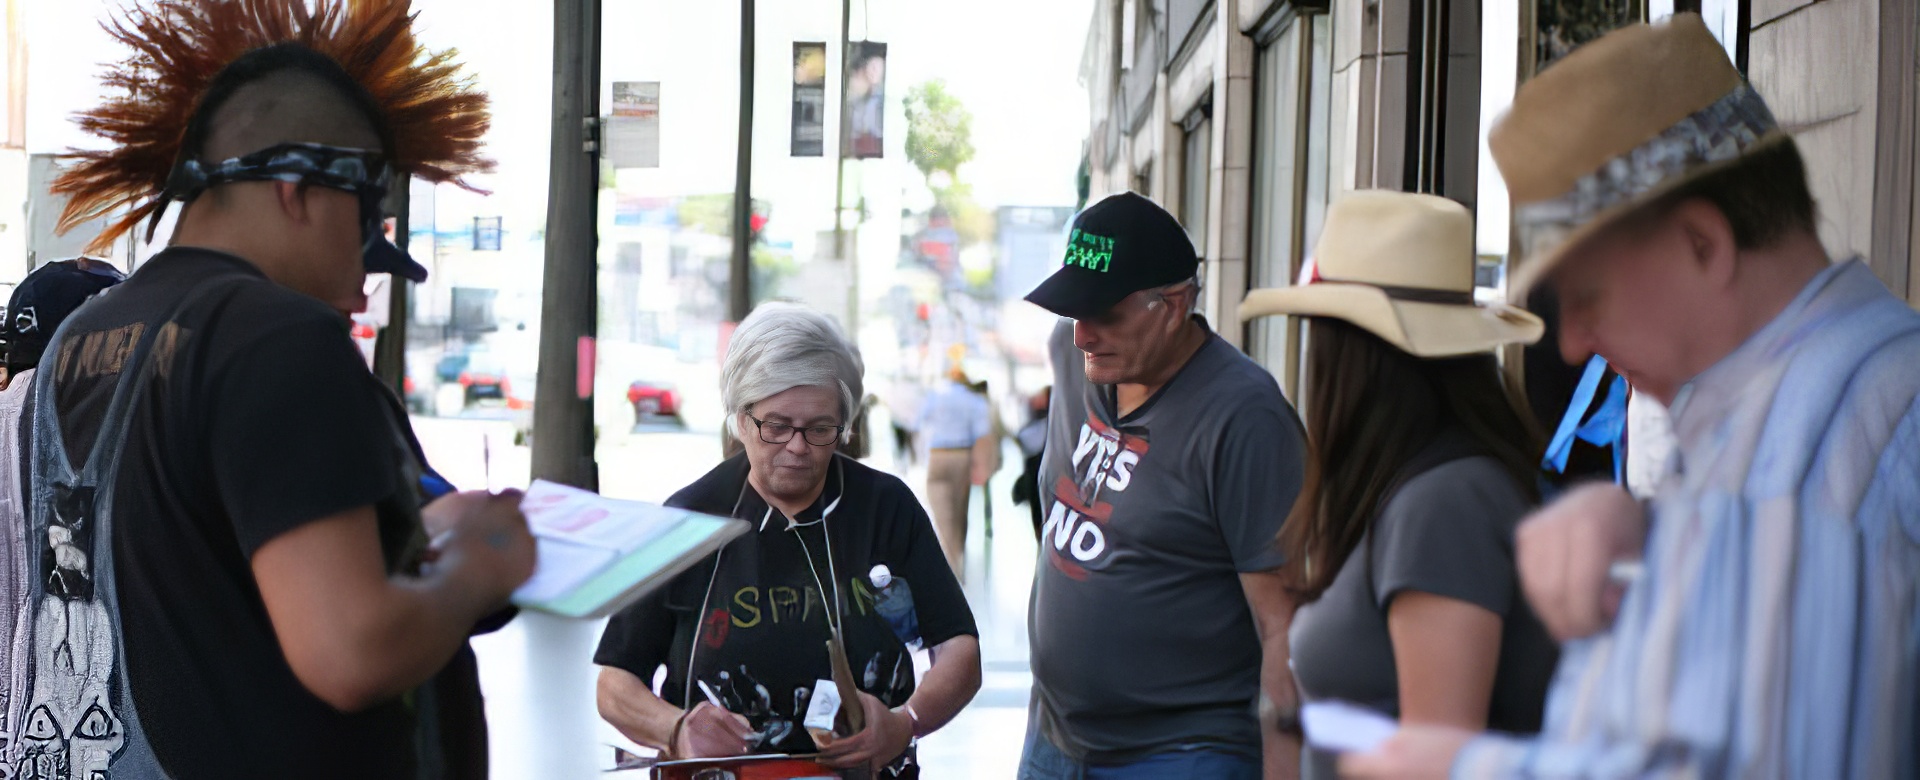 SPN volunteers gathering signatures in support of single-payer healthcare